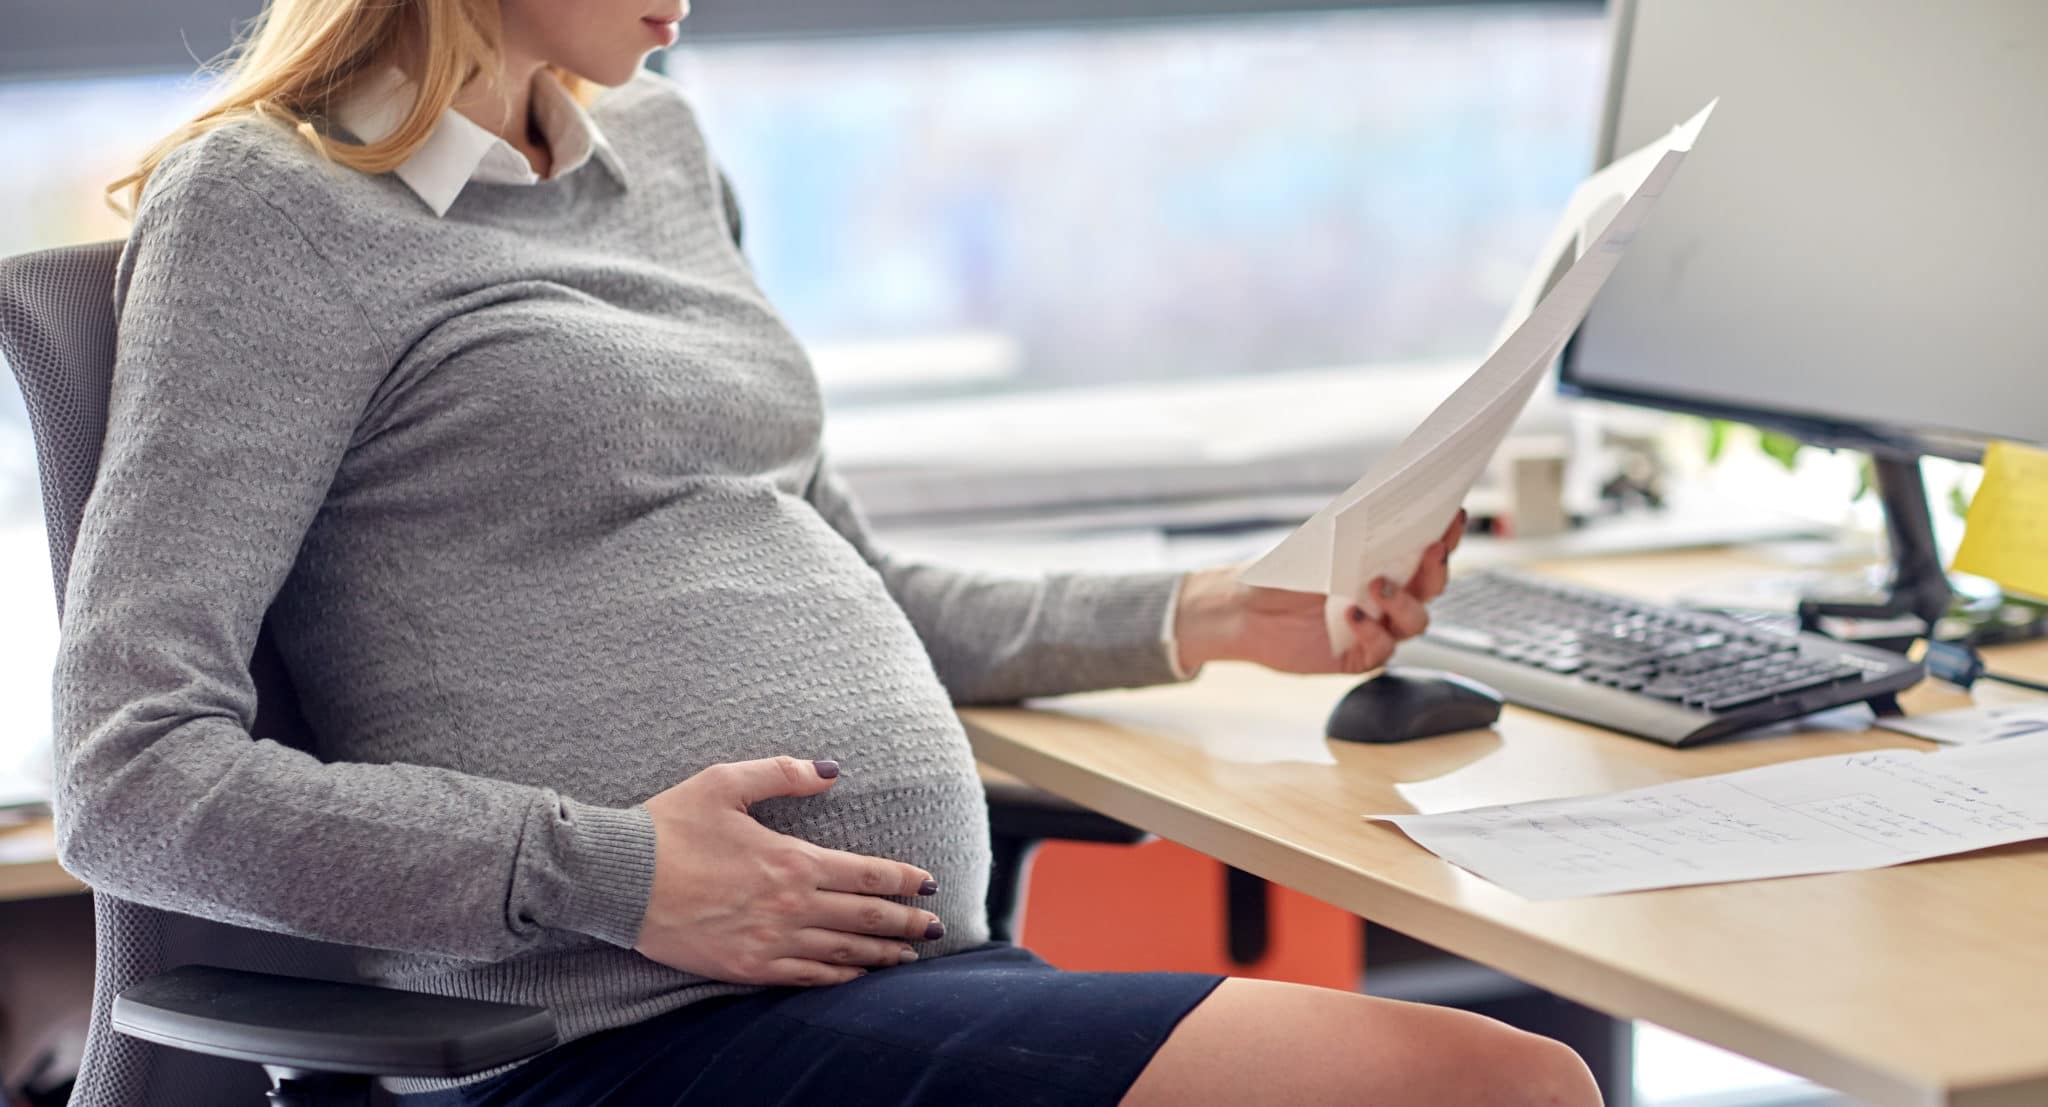 What to Do About Workplace Pregnancy Discrimination